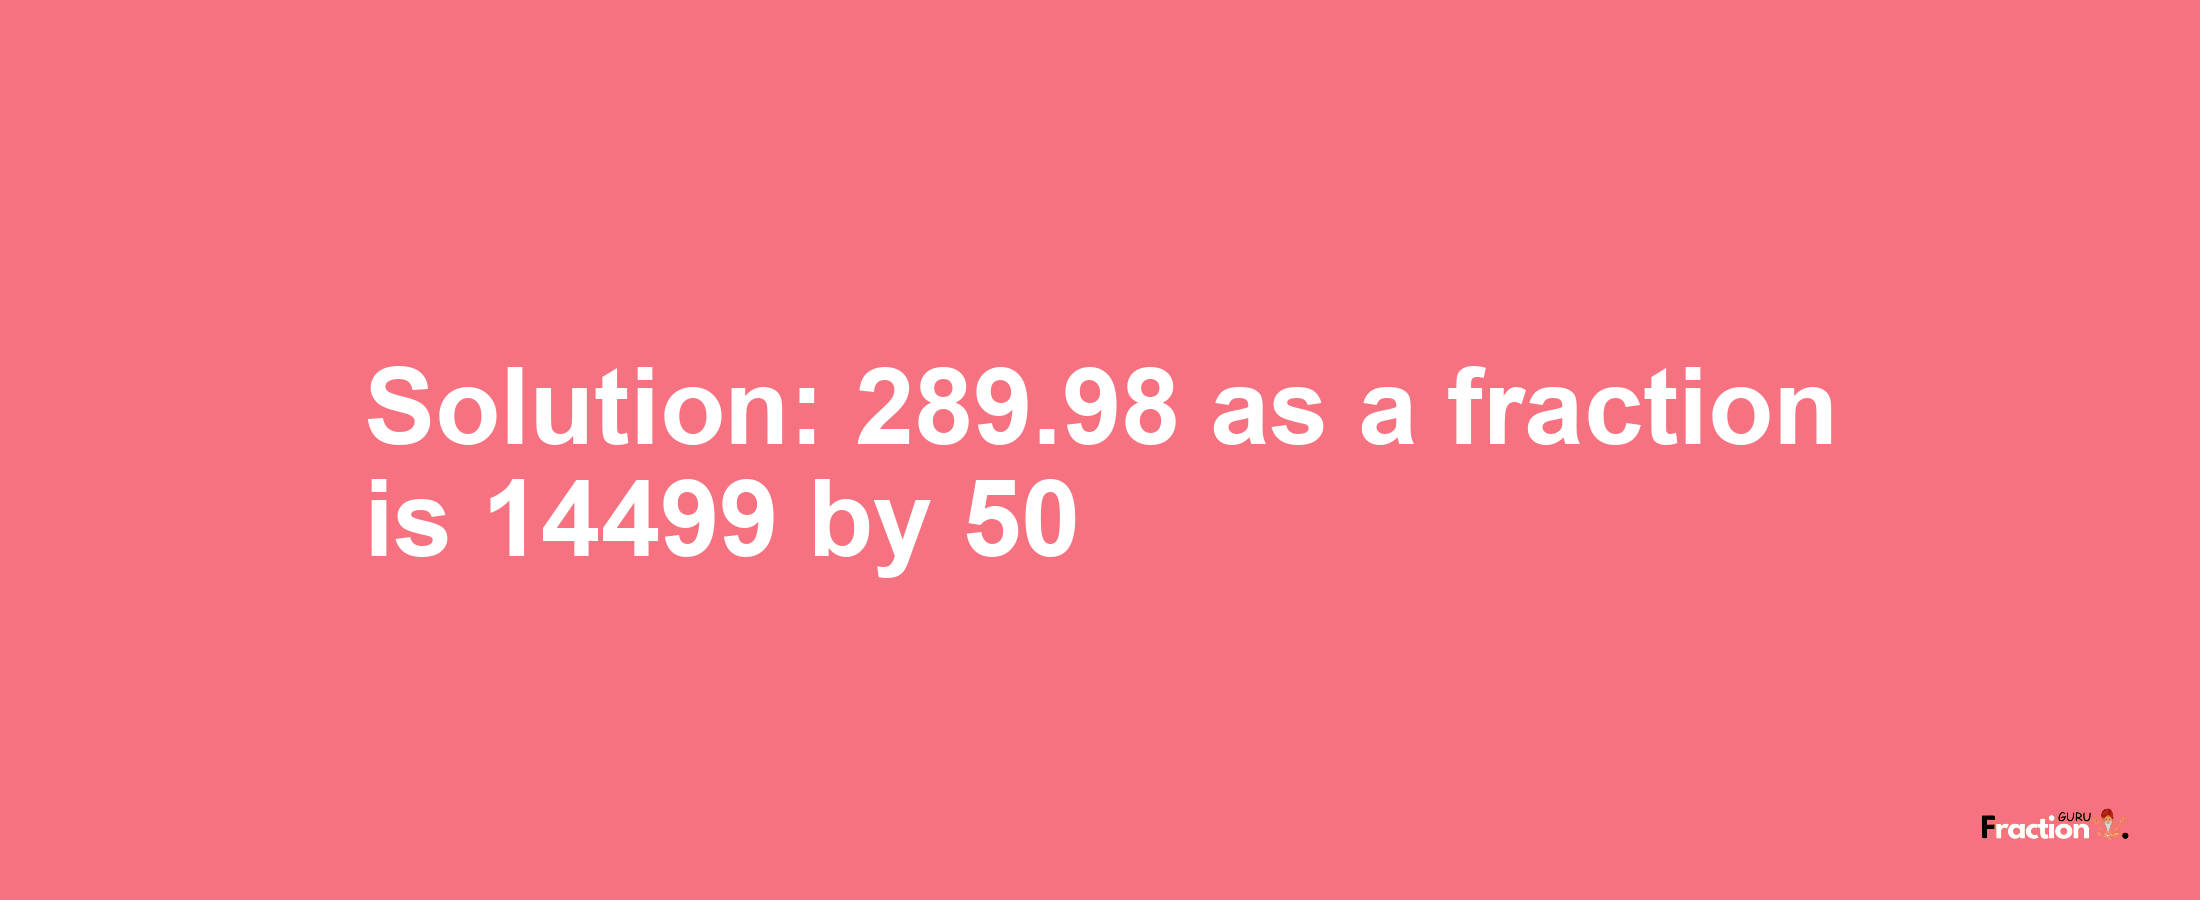 Solution:289.98 as a fraction is 14499/50